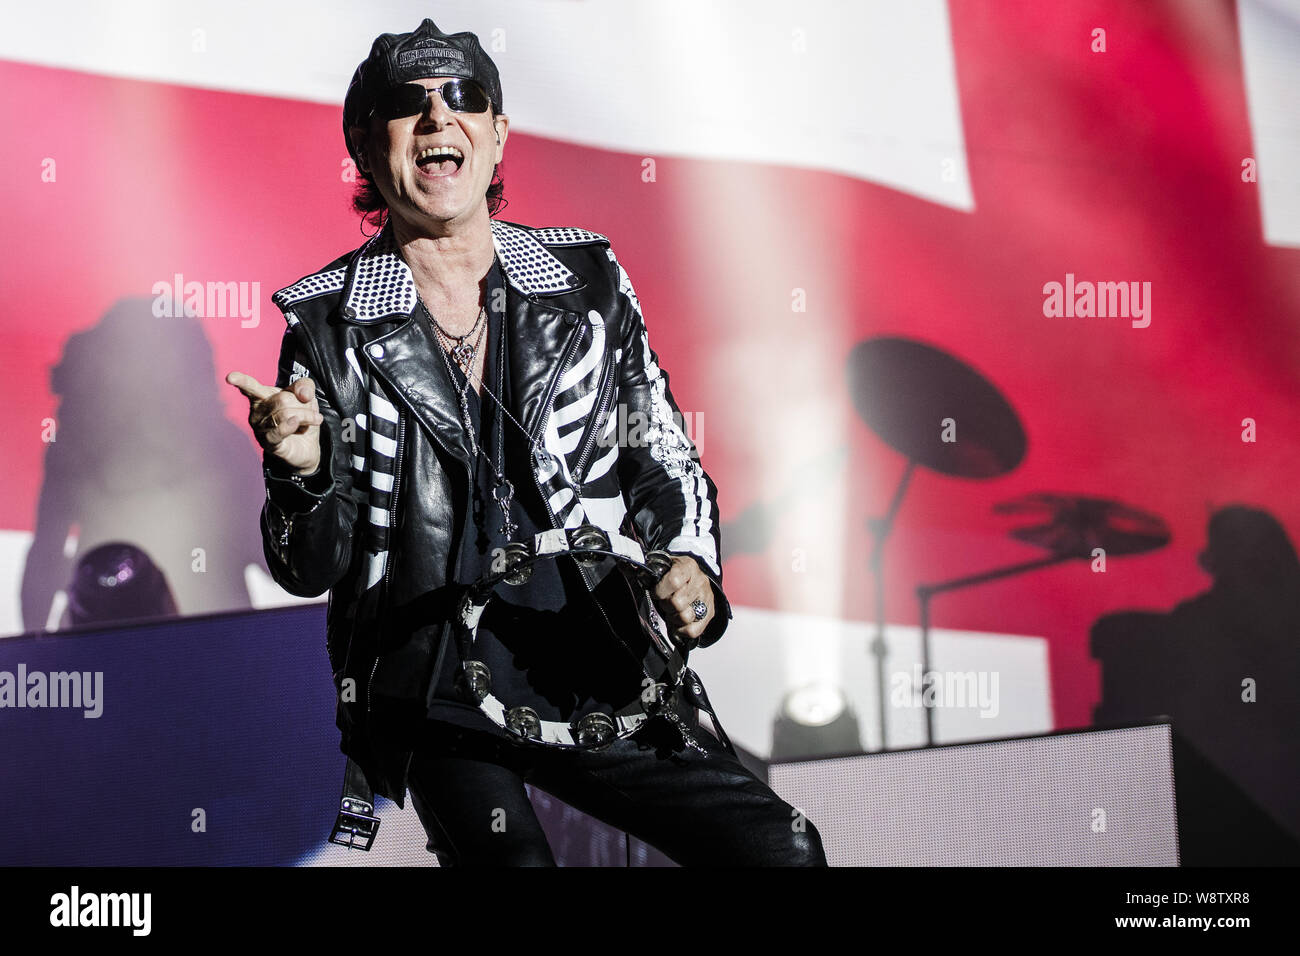 Scorpions perform live on stage at Bloodstock Open Air Festival, UK, 11th Aug, 2019. Stock Photo